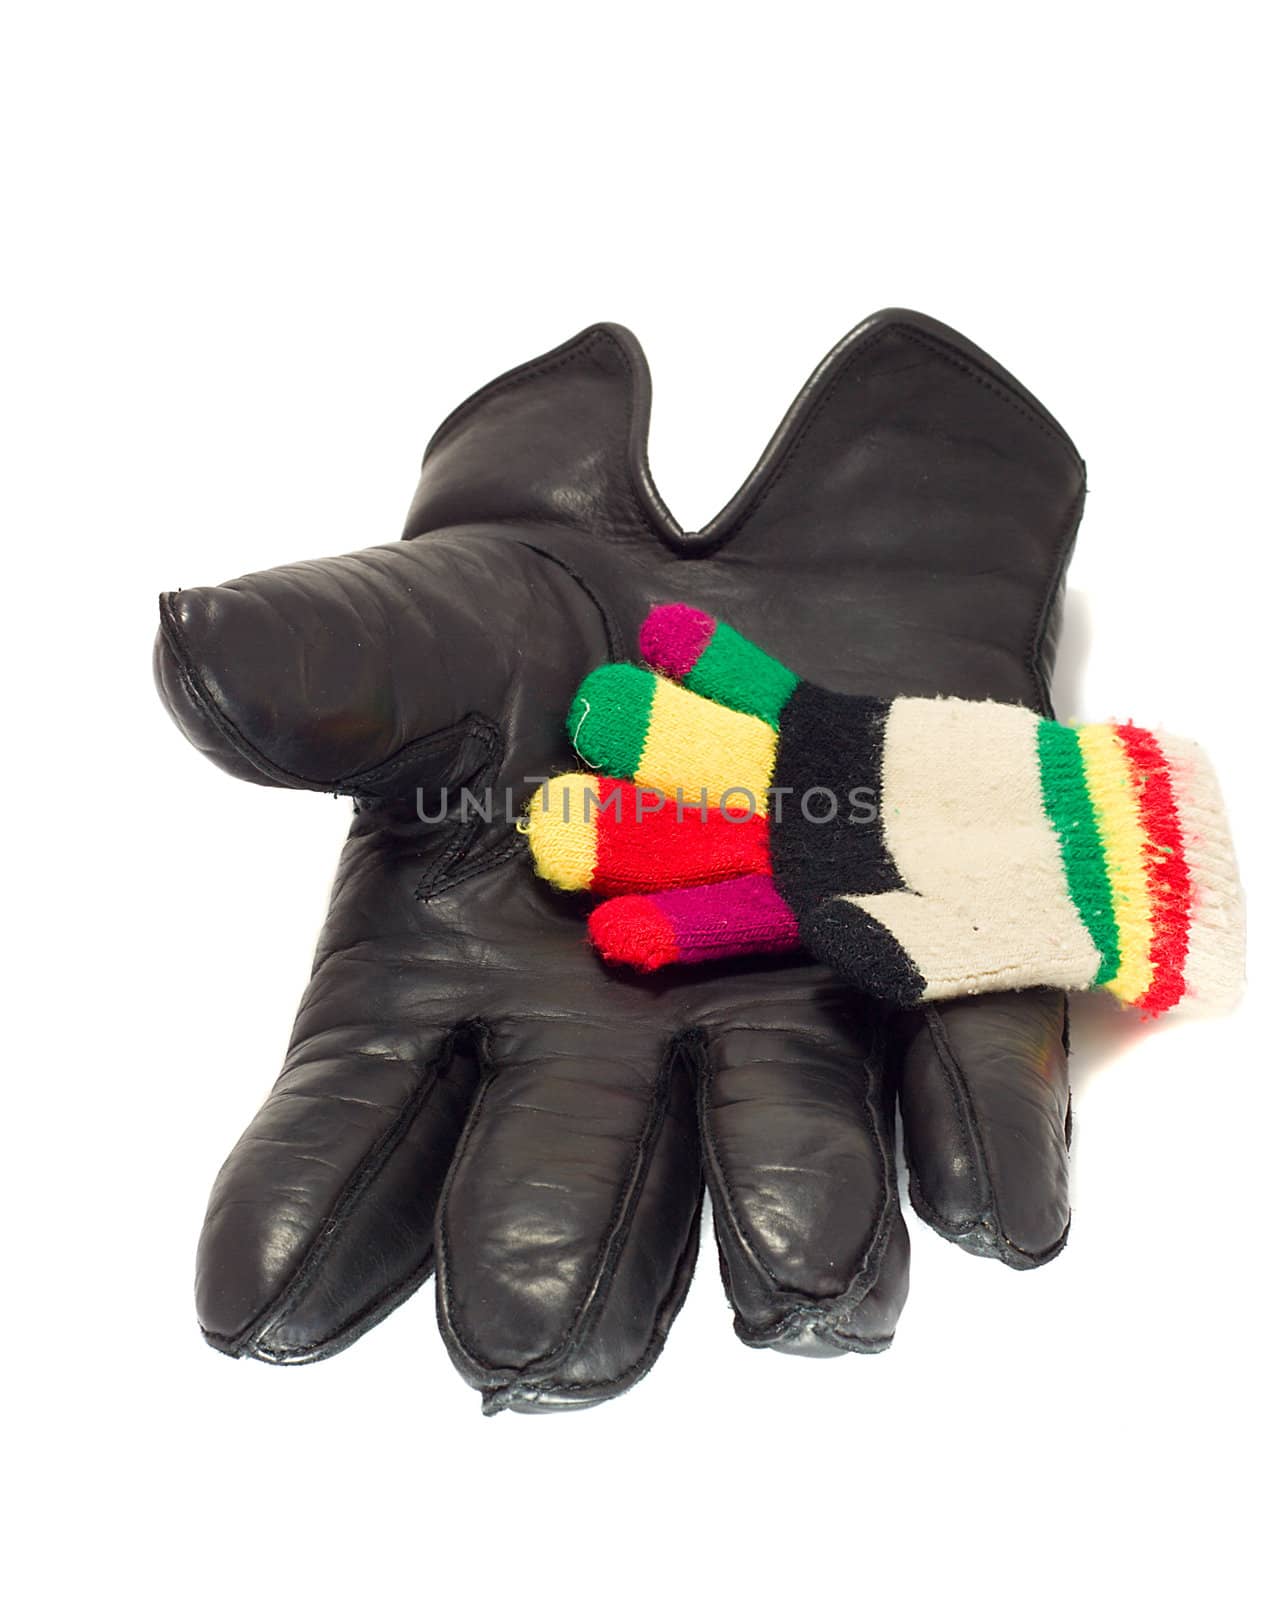 adult's and kid's gloves, isolated on white